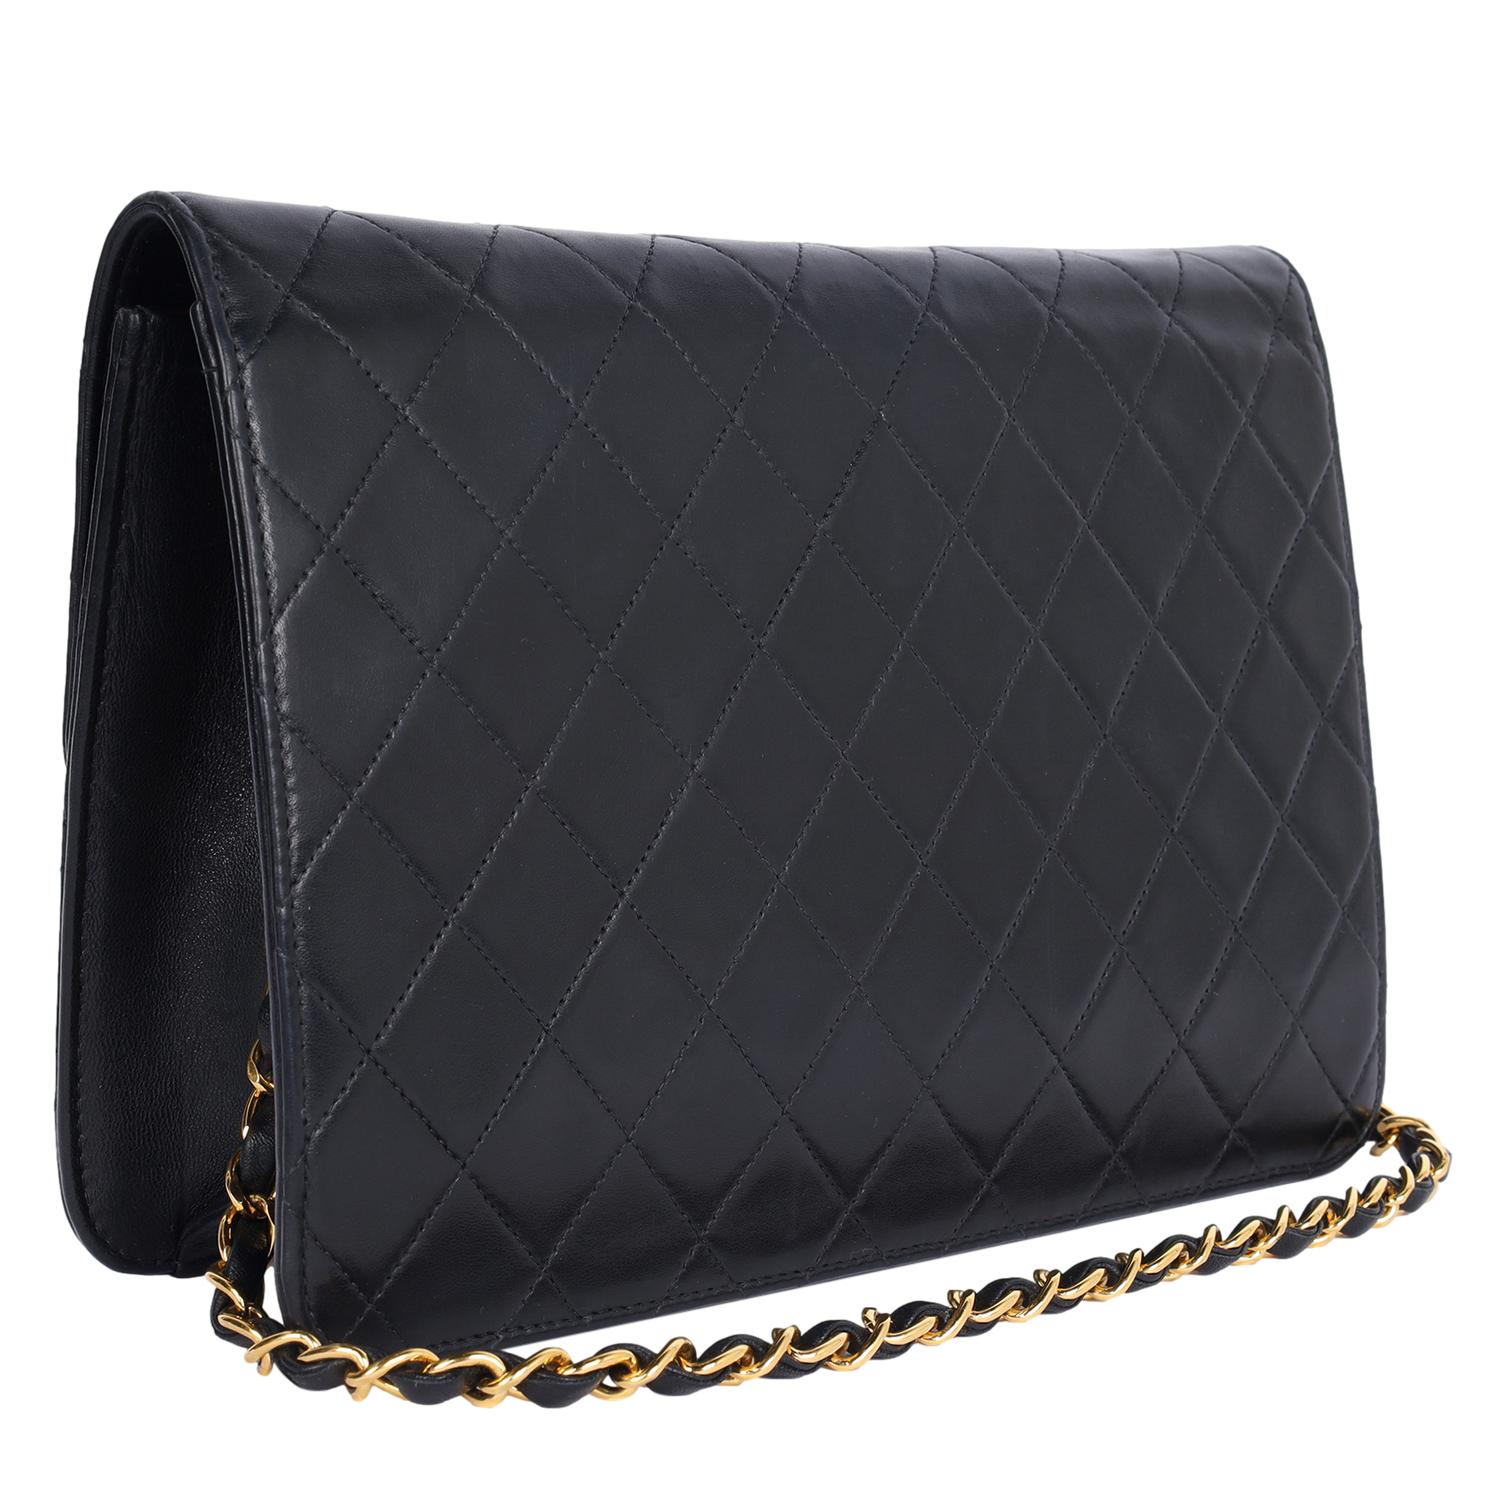 Chanel Black Classic Front Flap Quilted Leather Shoulder Bag For Sale 2